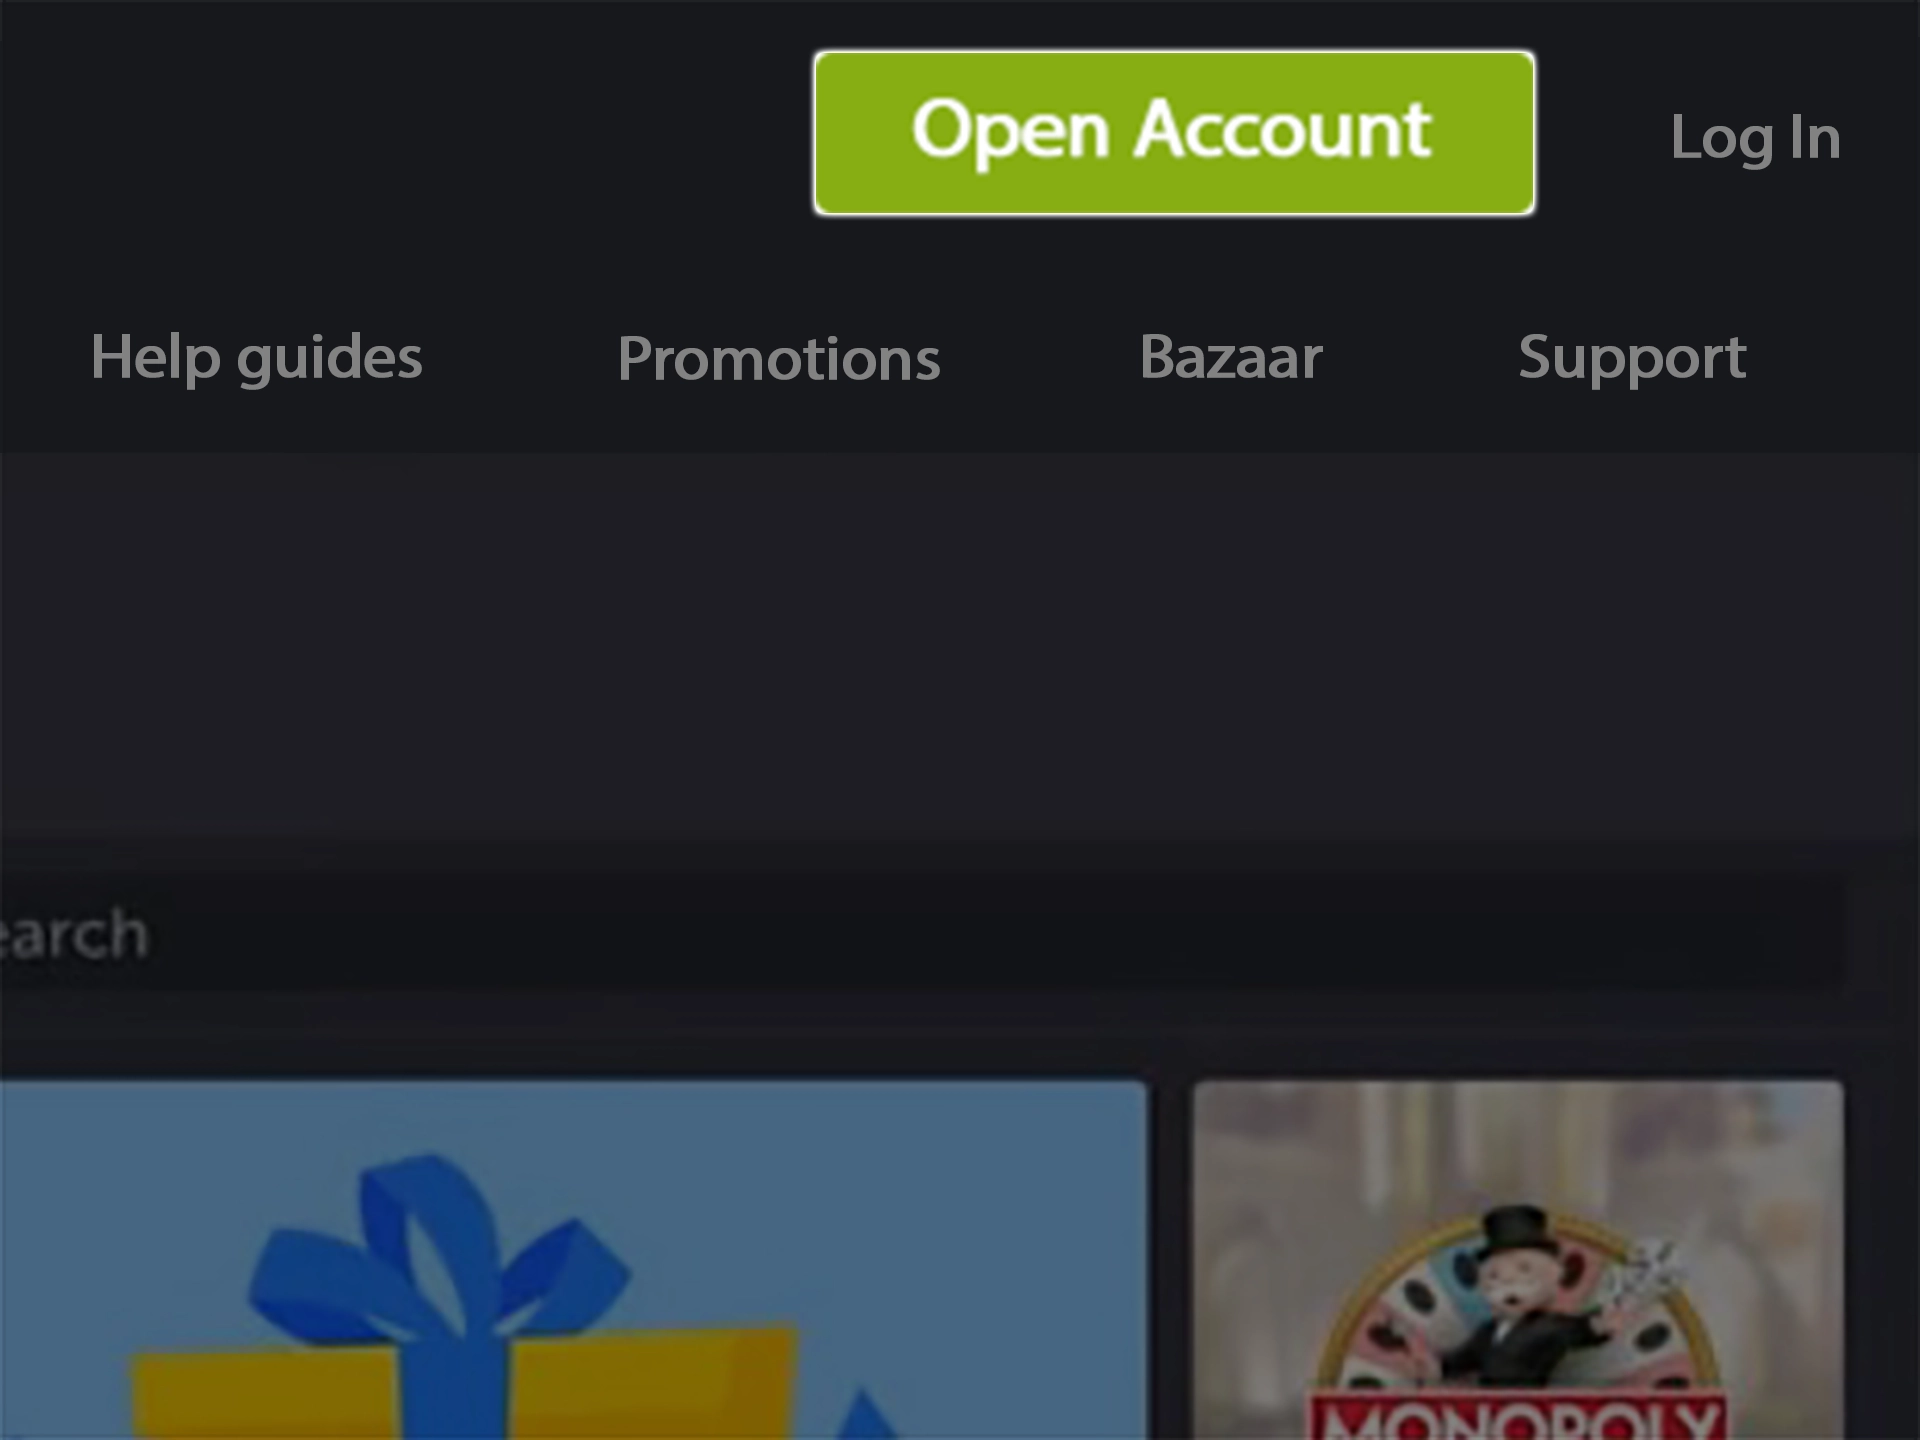 Find the open account button on the ComeOn website and click on it.